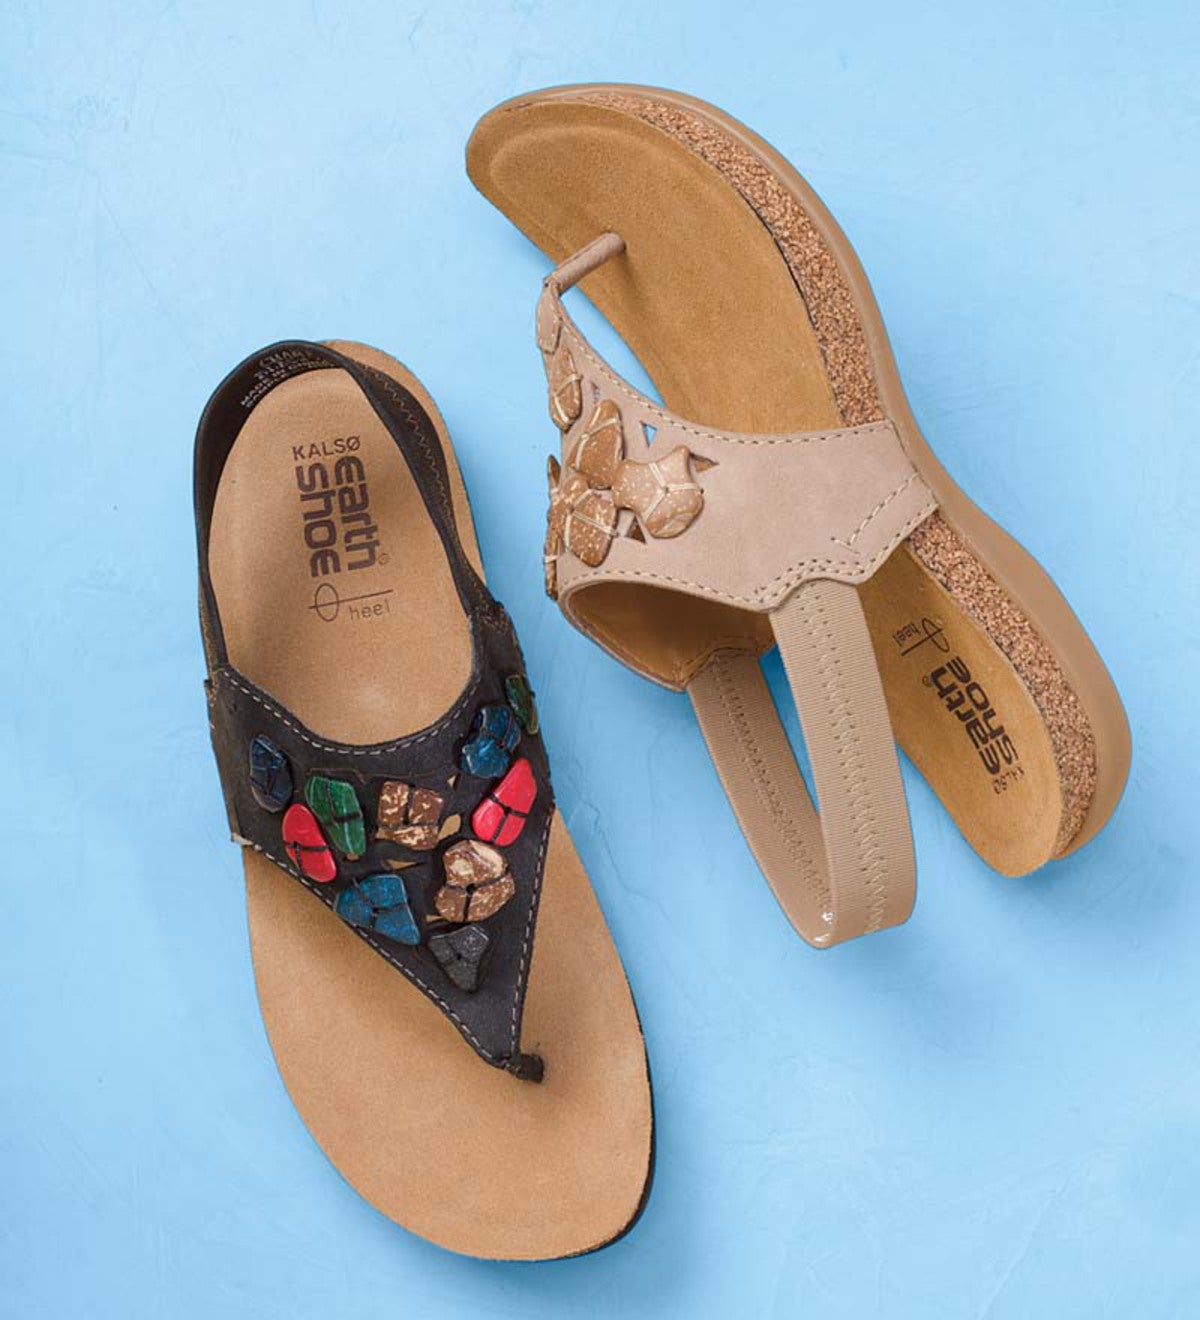 kalso earth shoes clearance